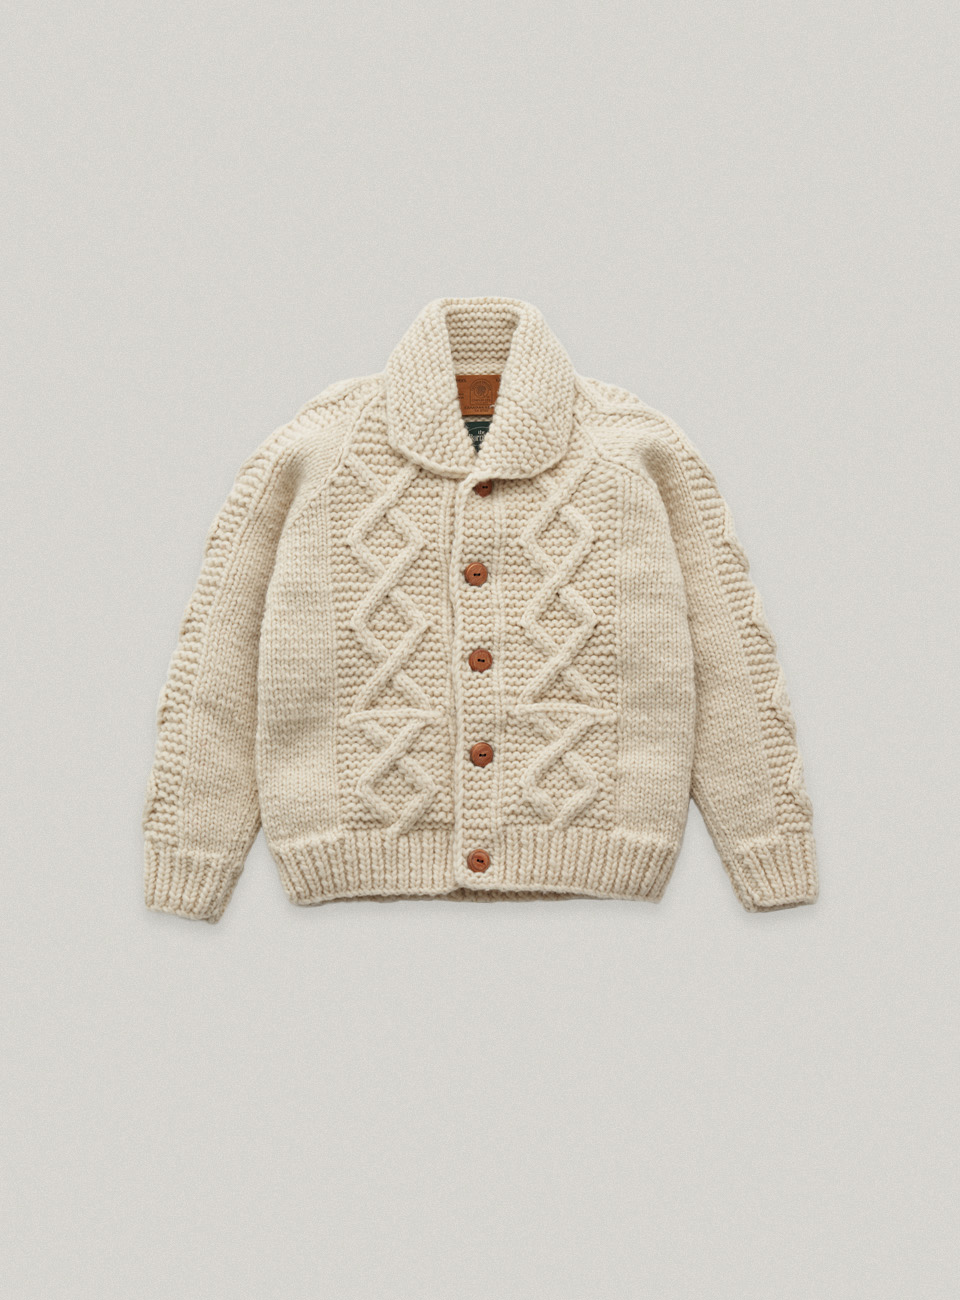 [Canadian Sweater Company x The Barnnet] Maple Hand Knit Cardigan